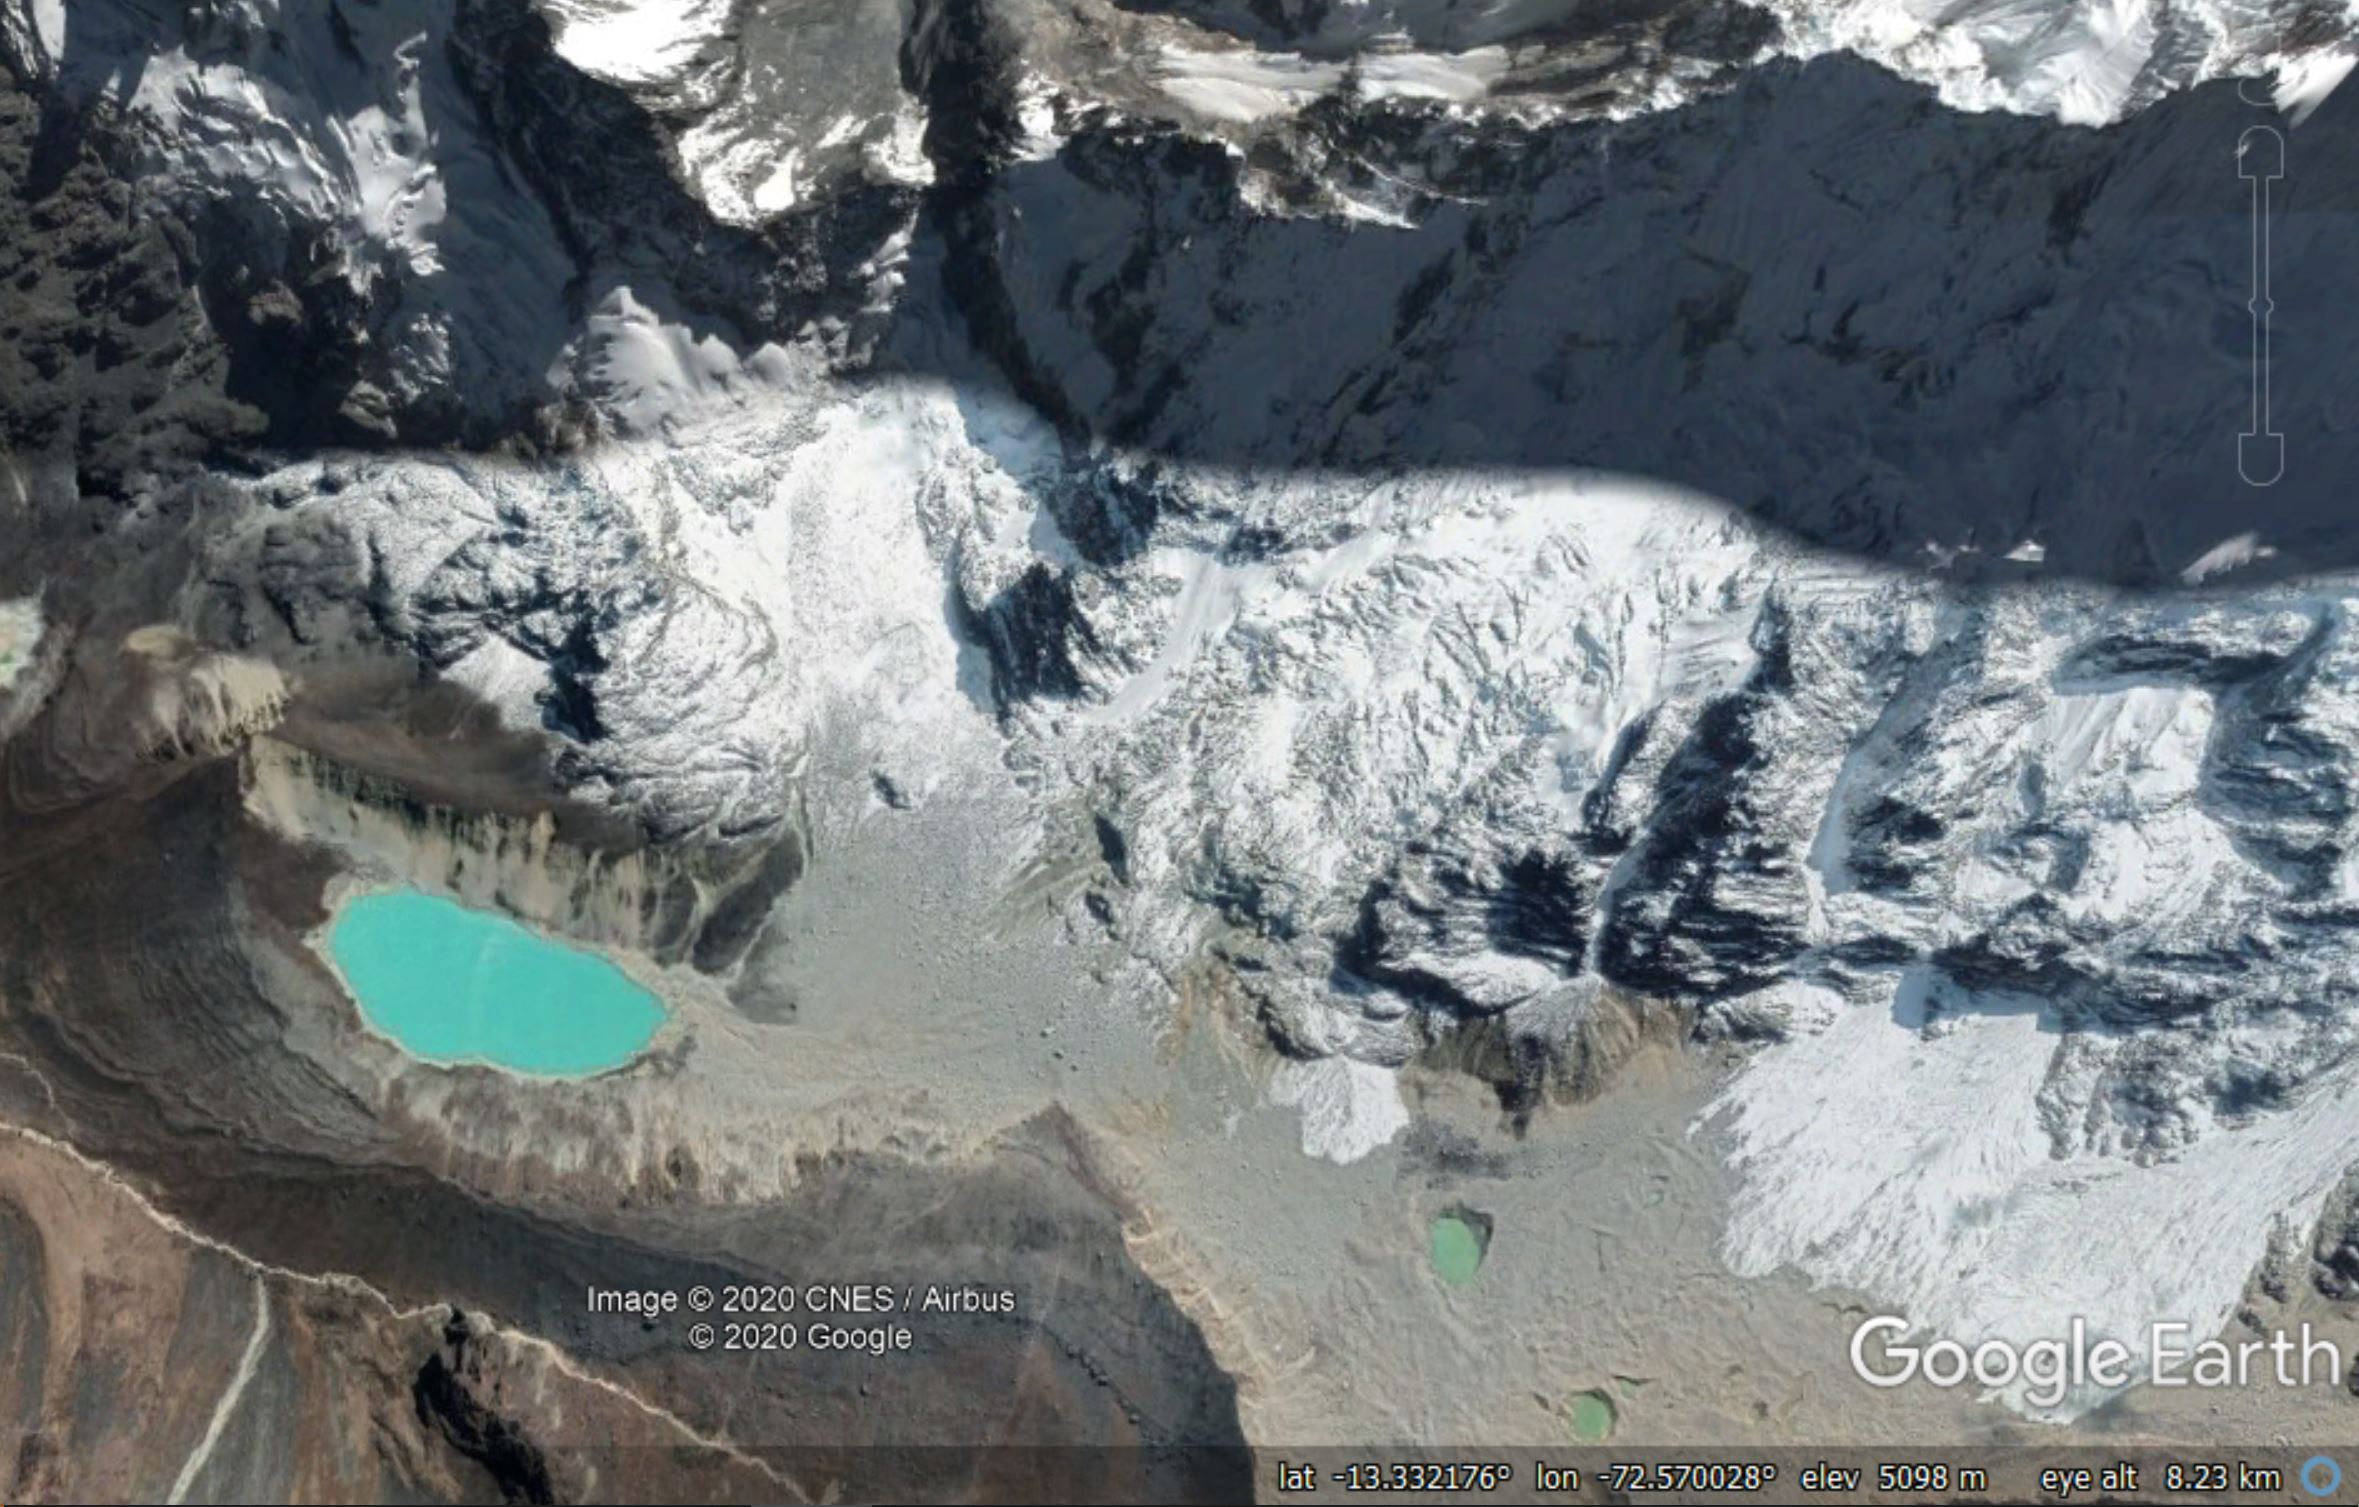 Google Earth image of the site of the Salkantay landslide